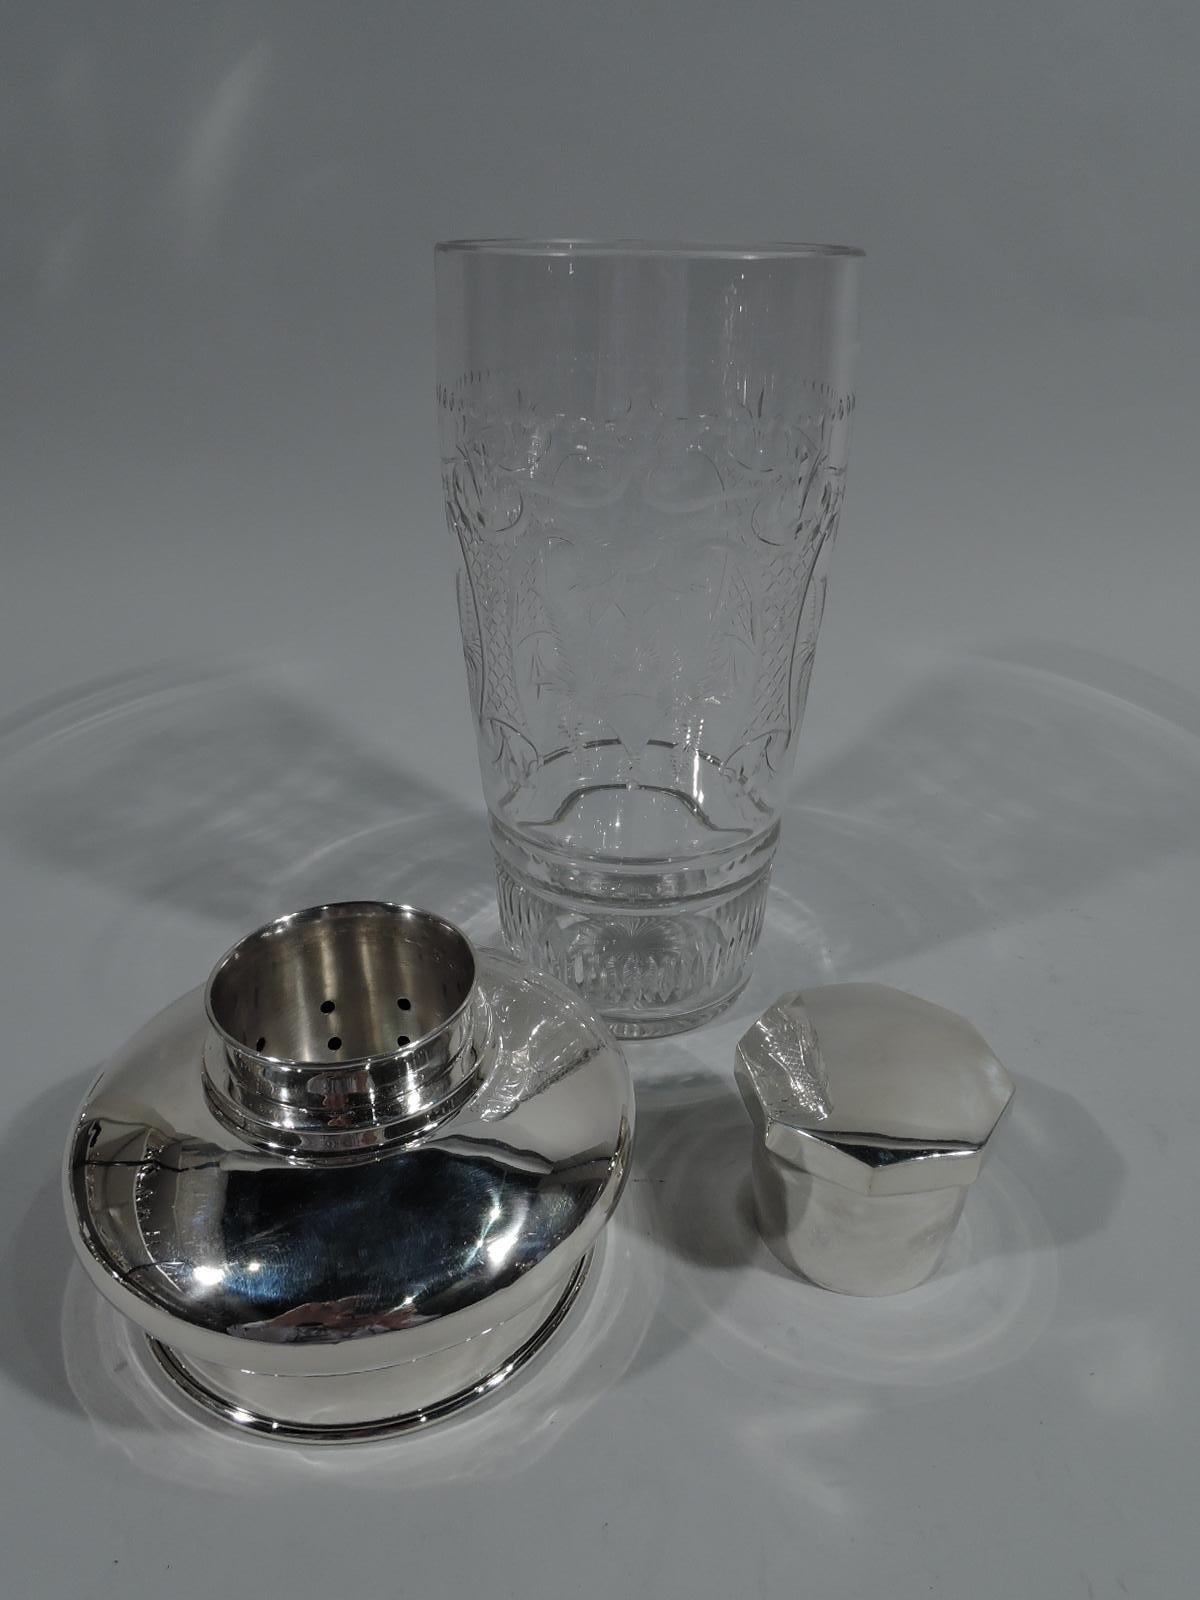 Large American Modern sterling silver and glass cocktail Shaker. Made by Erskine V. Van Houten in White Plains, New York, circa 1940. Glass cup with straight and tapering sides with etched stylized ornament: strapwork cartouches alternating with